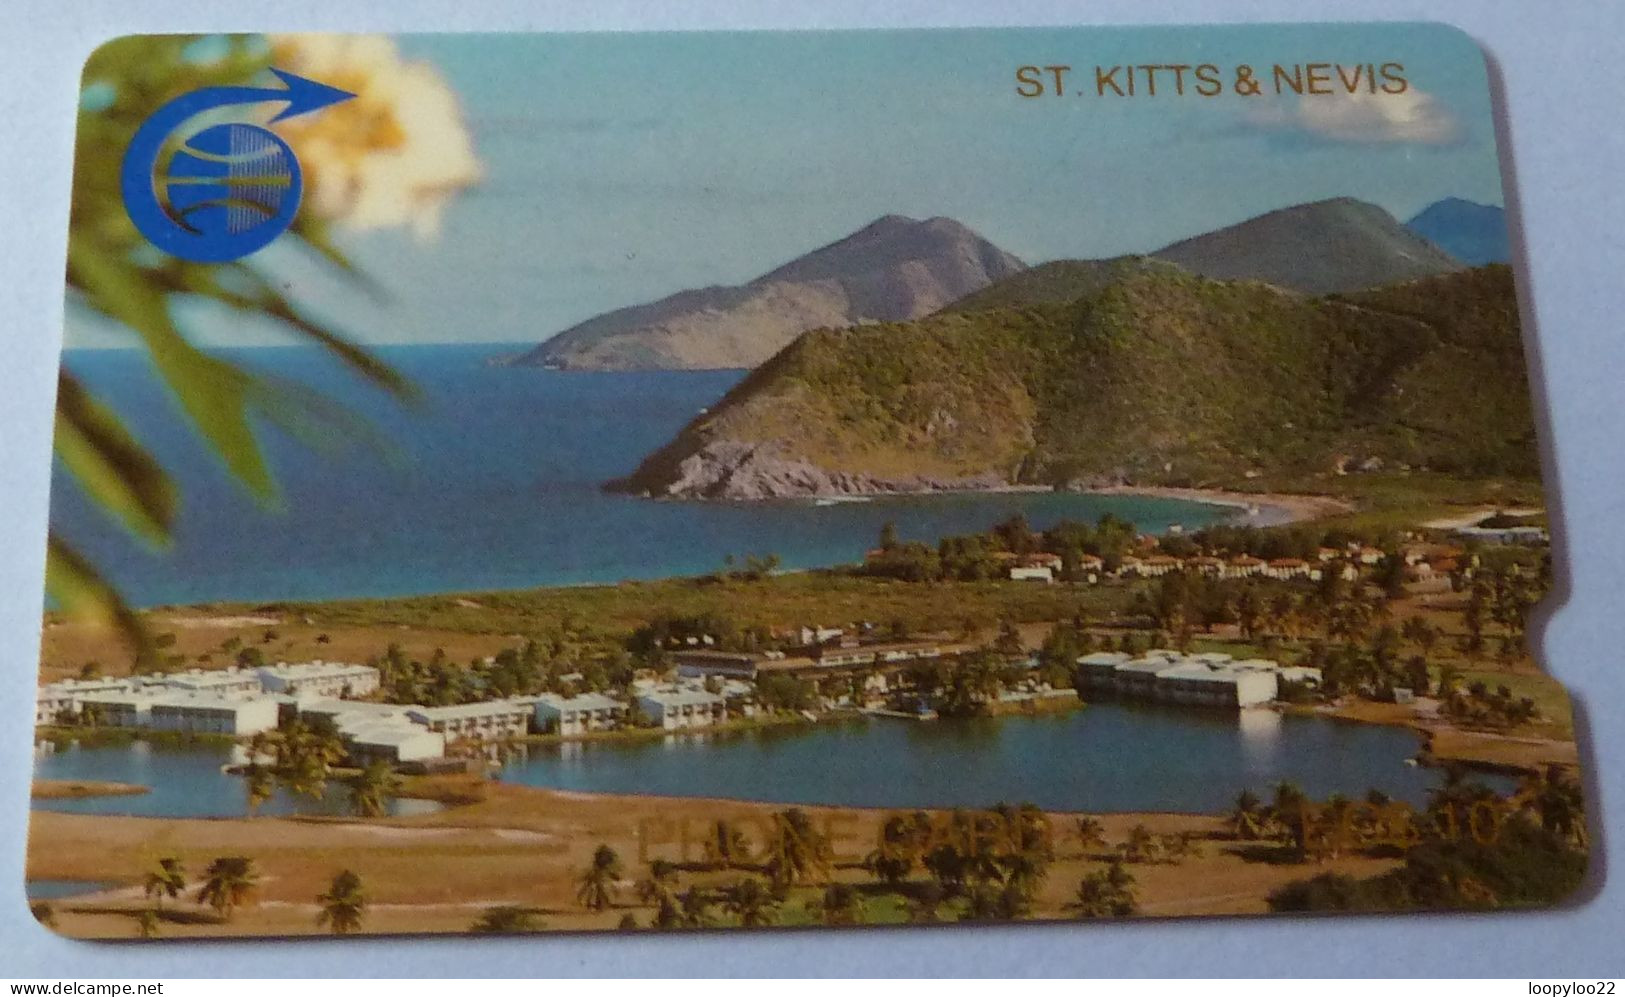 ST KITTS & NEVIS - GPT - 1st Issue - 1CSKB - Deep Notch - $10 - VF Used - St. Kitts & Nevis